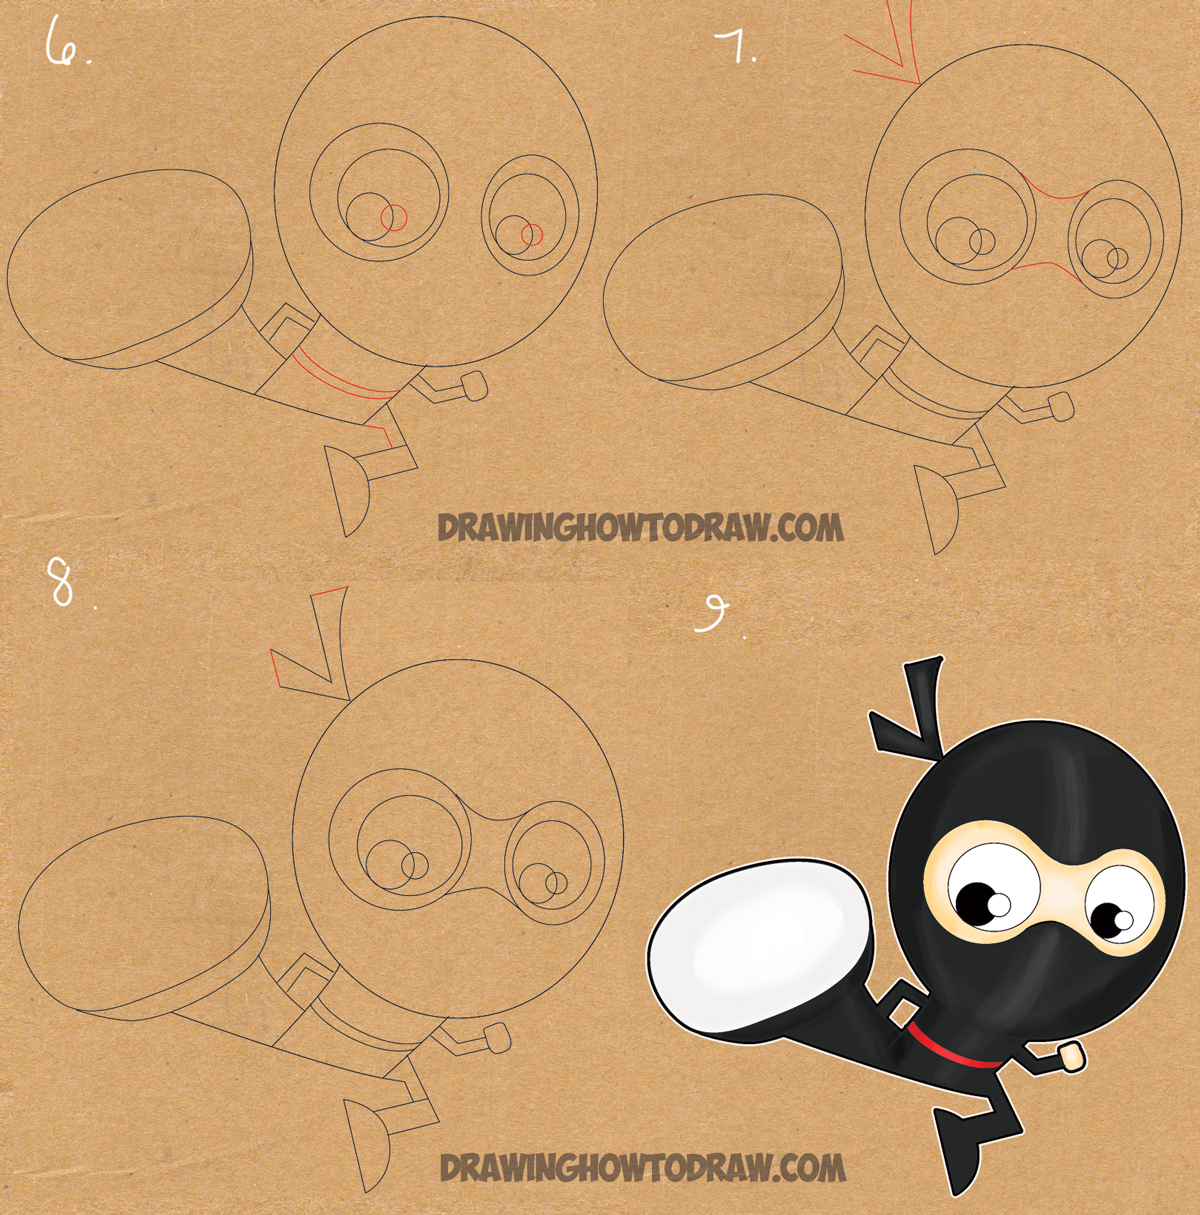 Learn How to Draw Cartoon Ninjas with the Letter F - Easy Drawing Tutorial for Kids